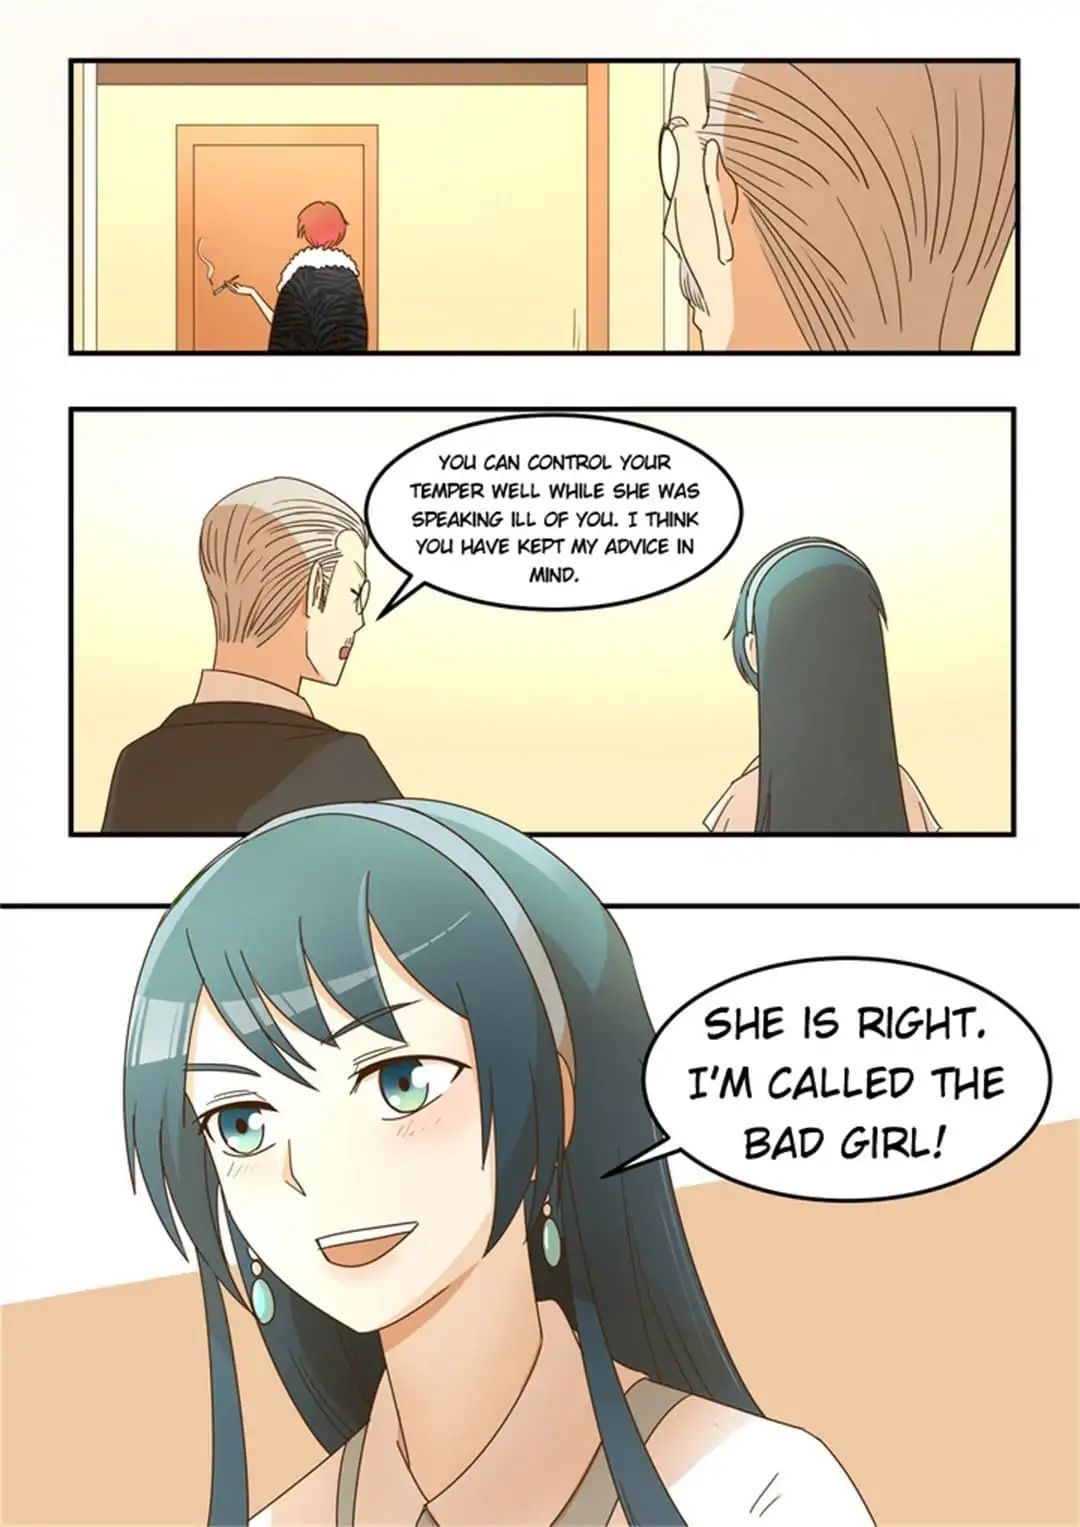 Miss. Delinquent 恶女千金 Chapter 13 - page 8